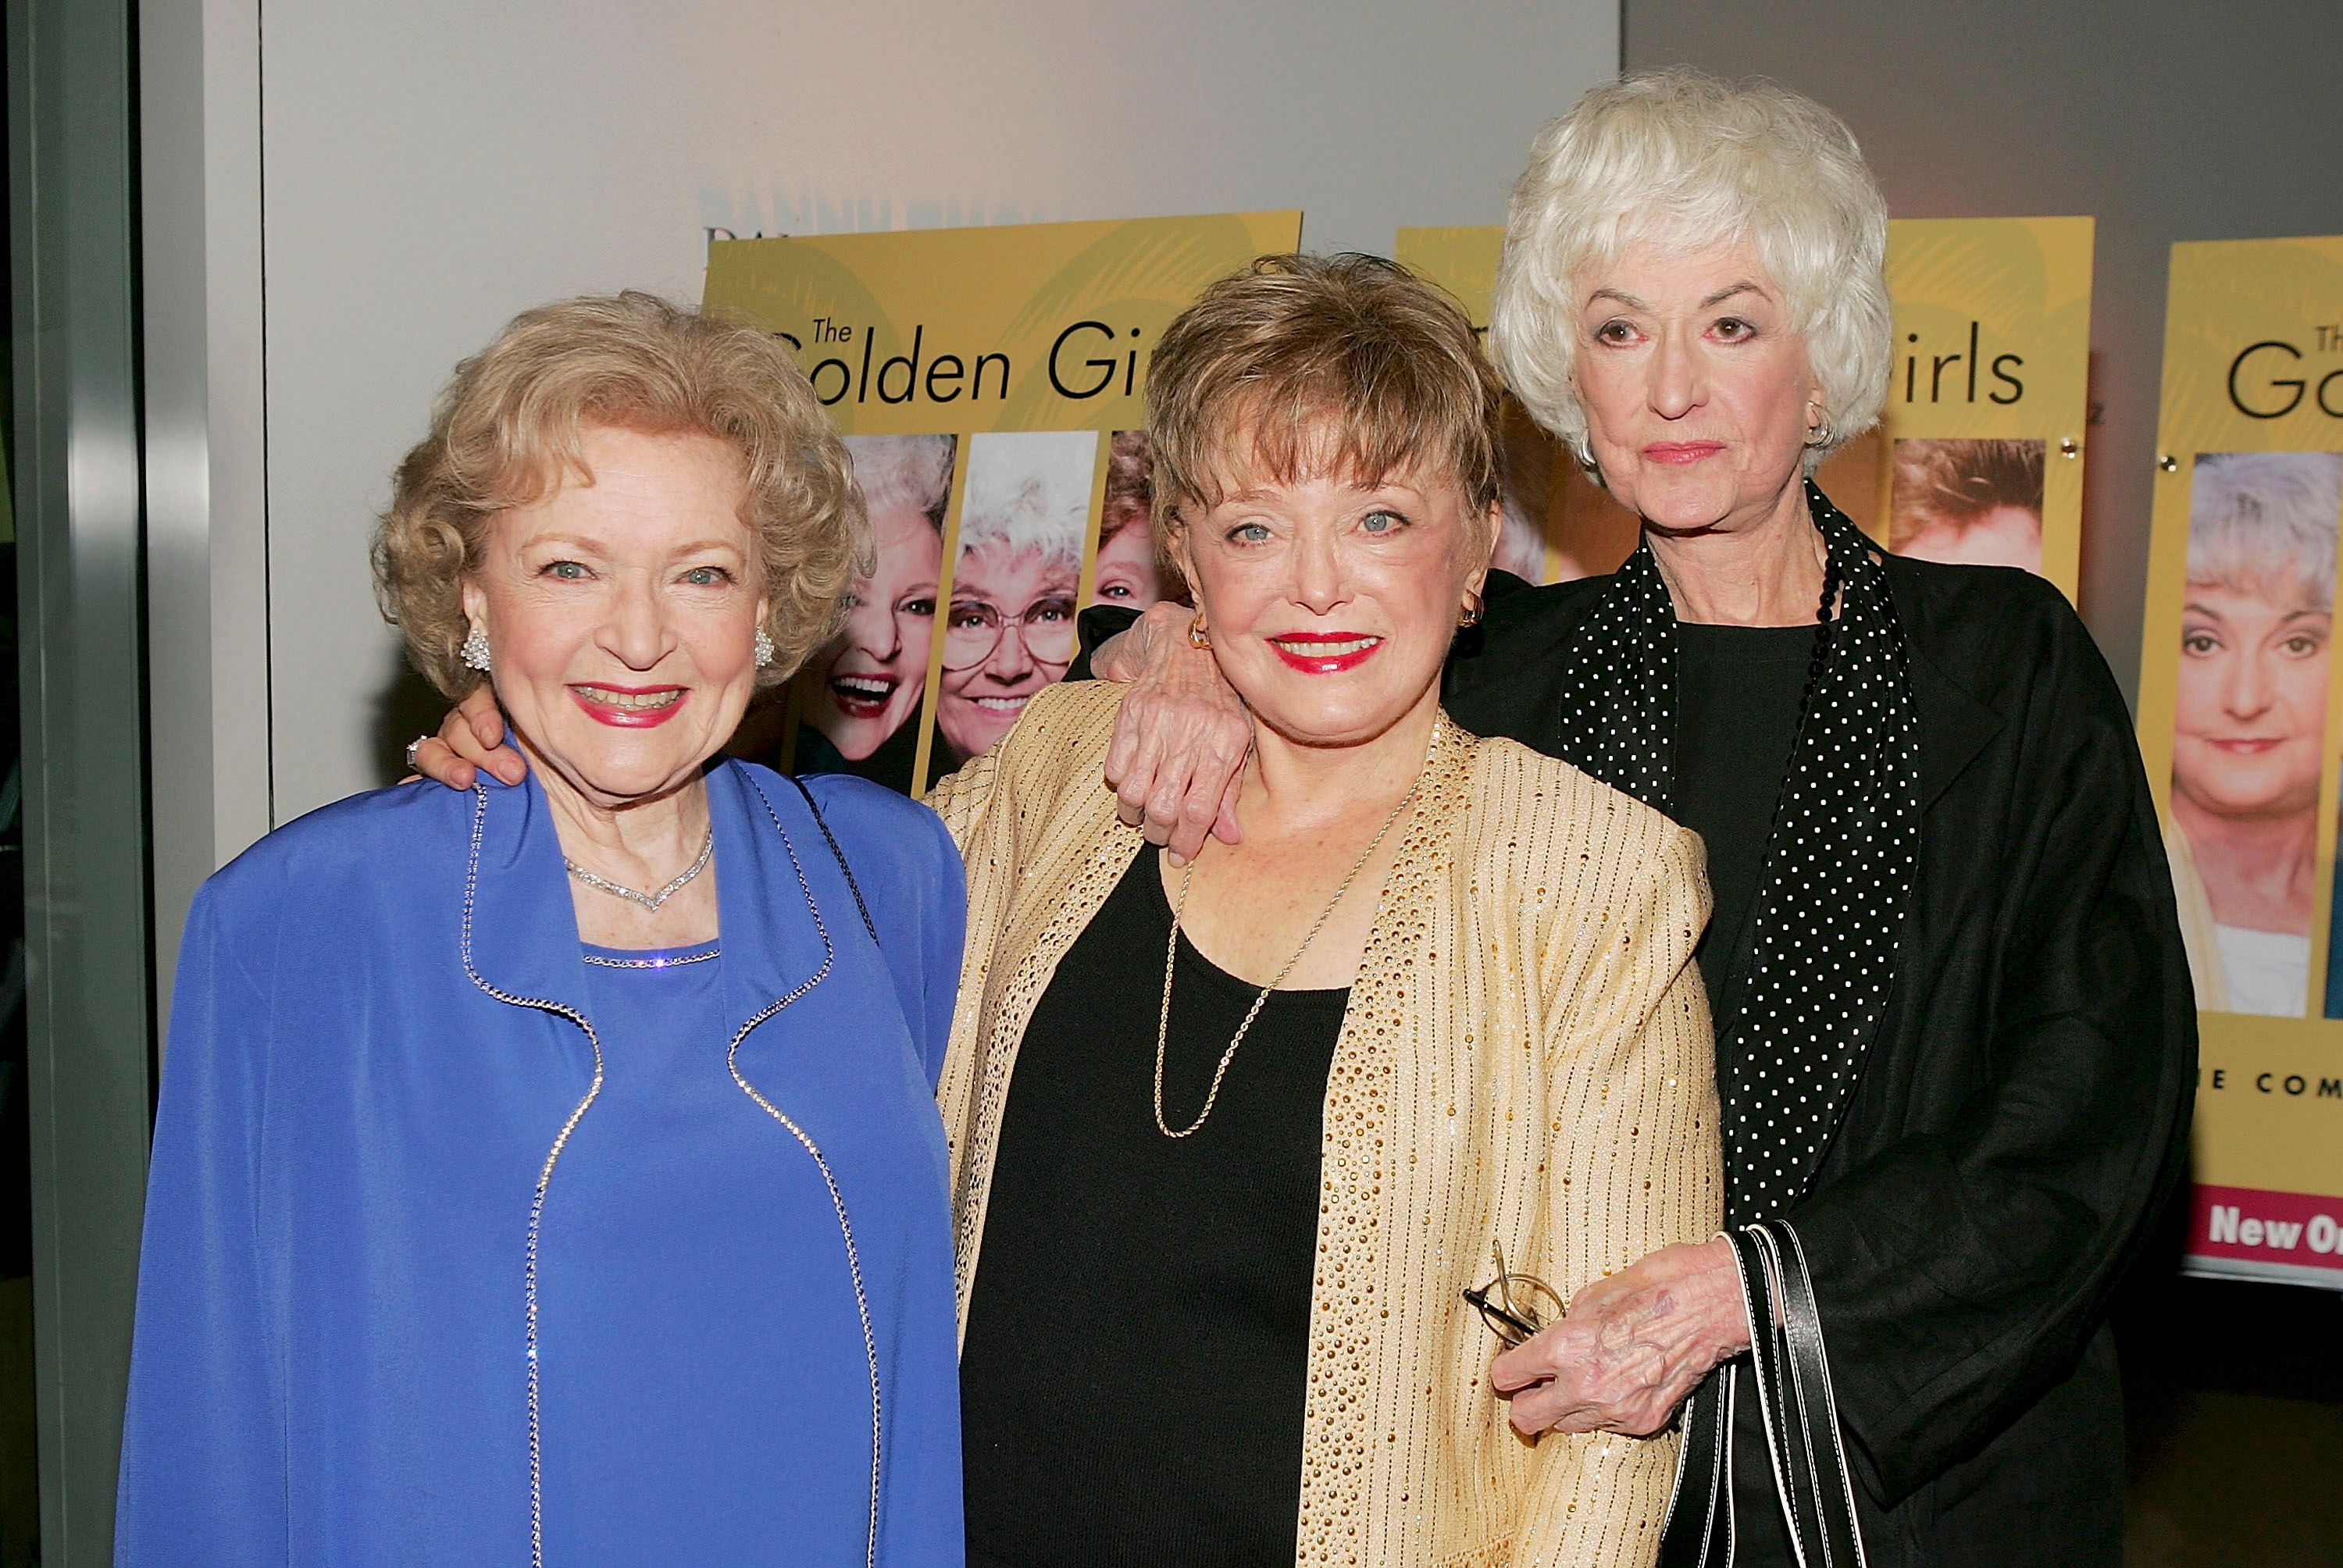 Betty White, Rue McClanahan and Bea Arthur at the DVD release party for "The Golden Girls" in 2004 | Photo: Getty Images